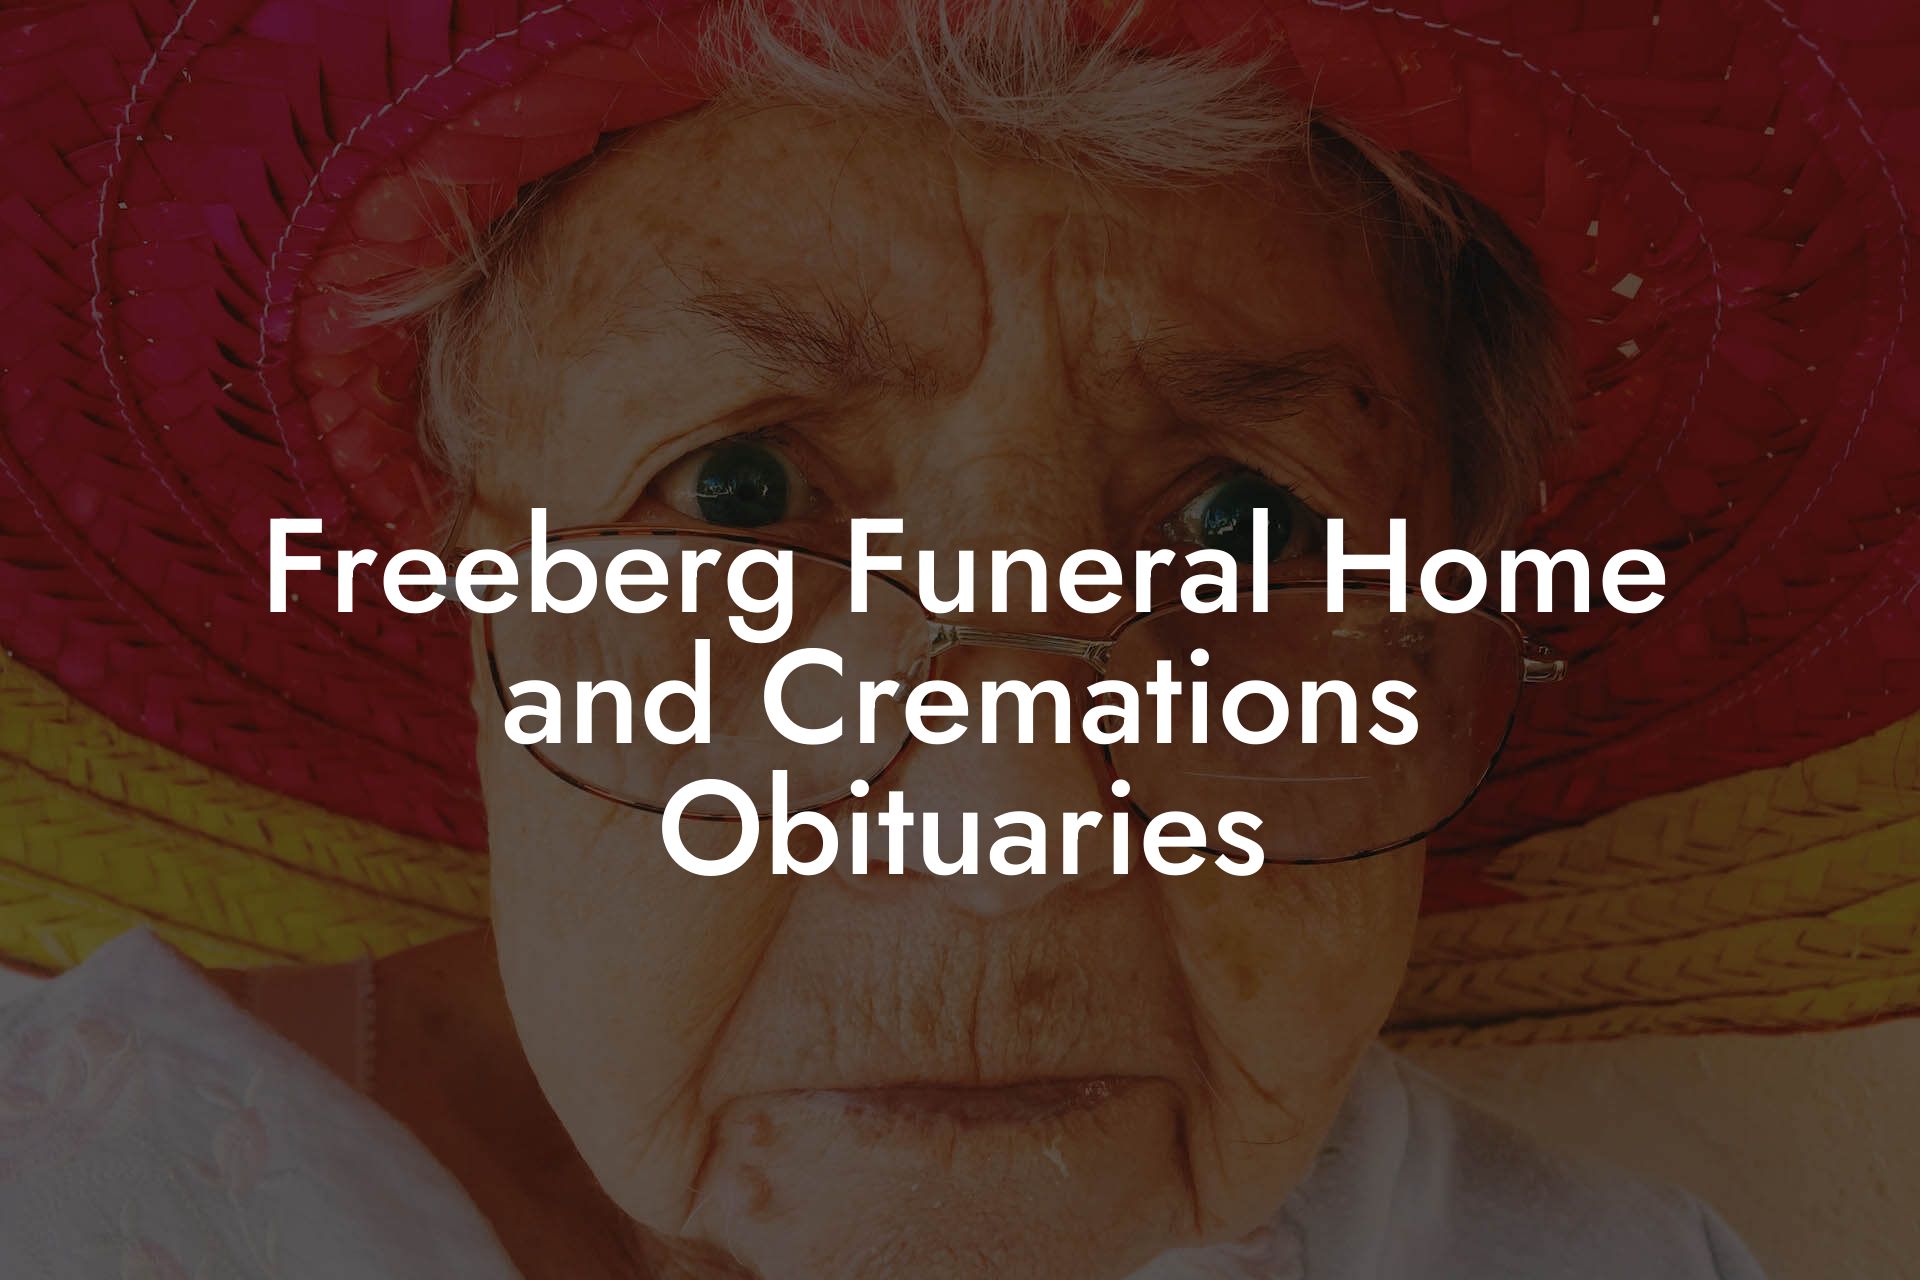 Freeberg Funeral Home and Cremations Obituaries